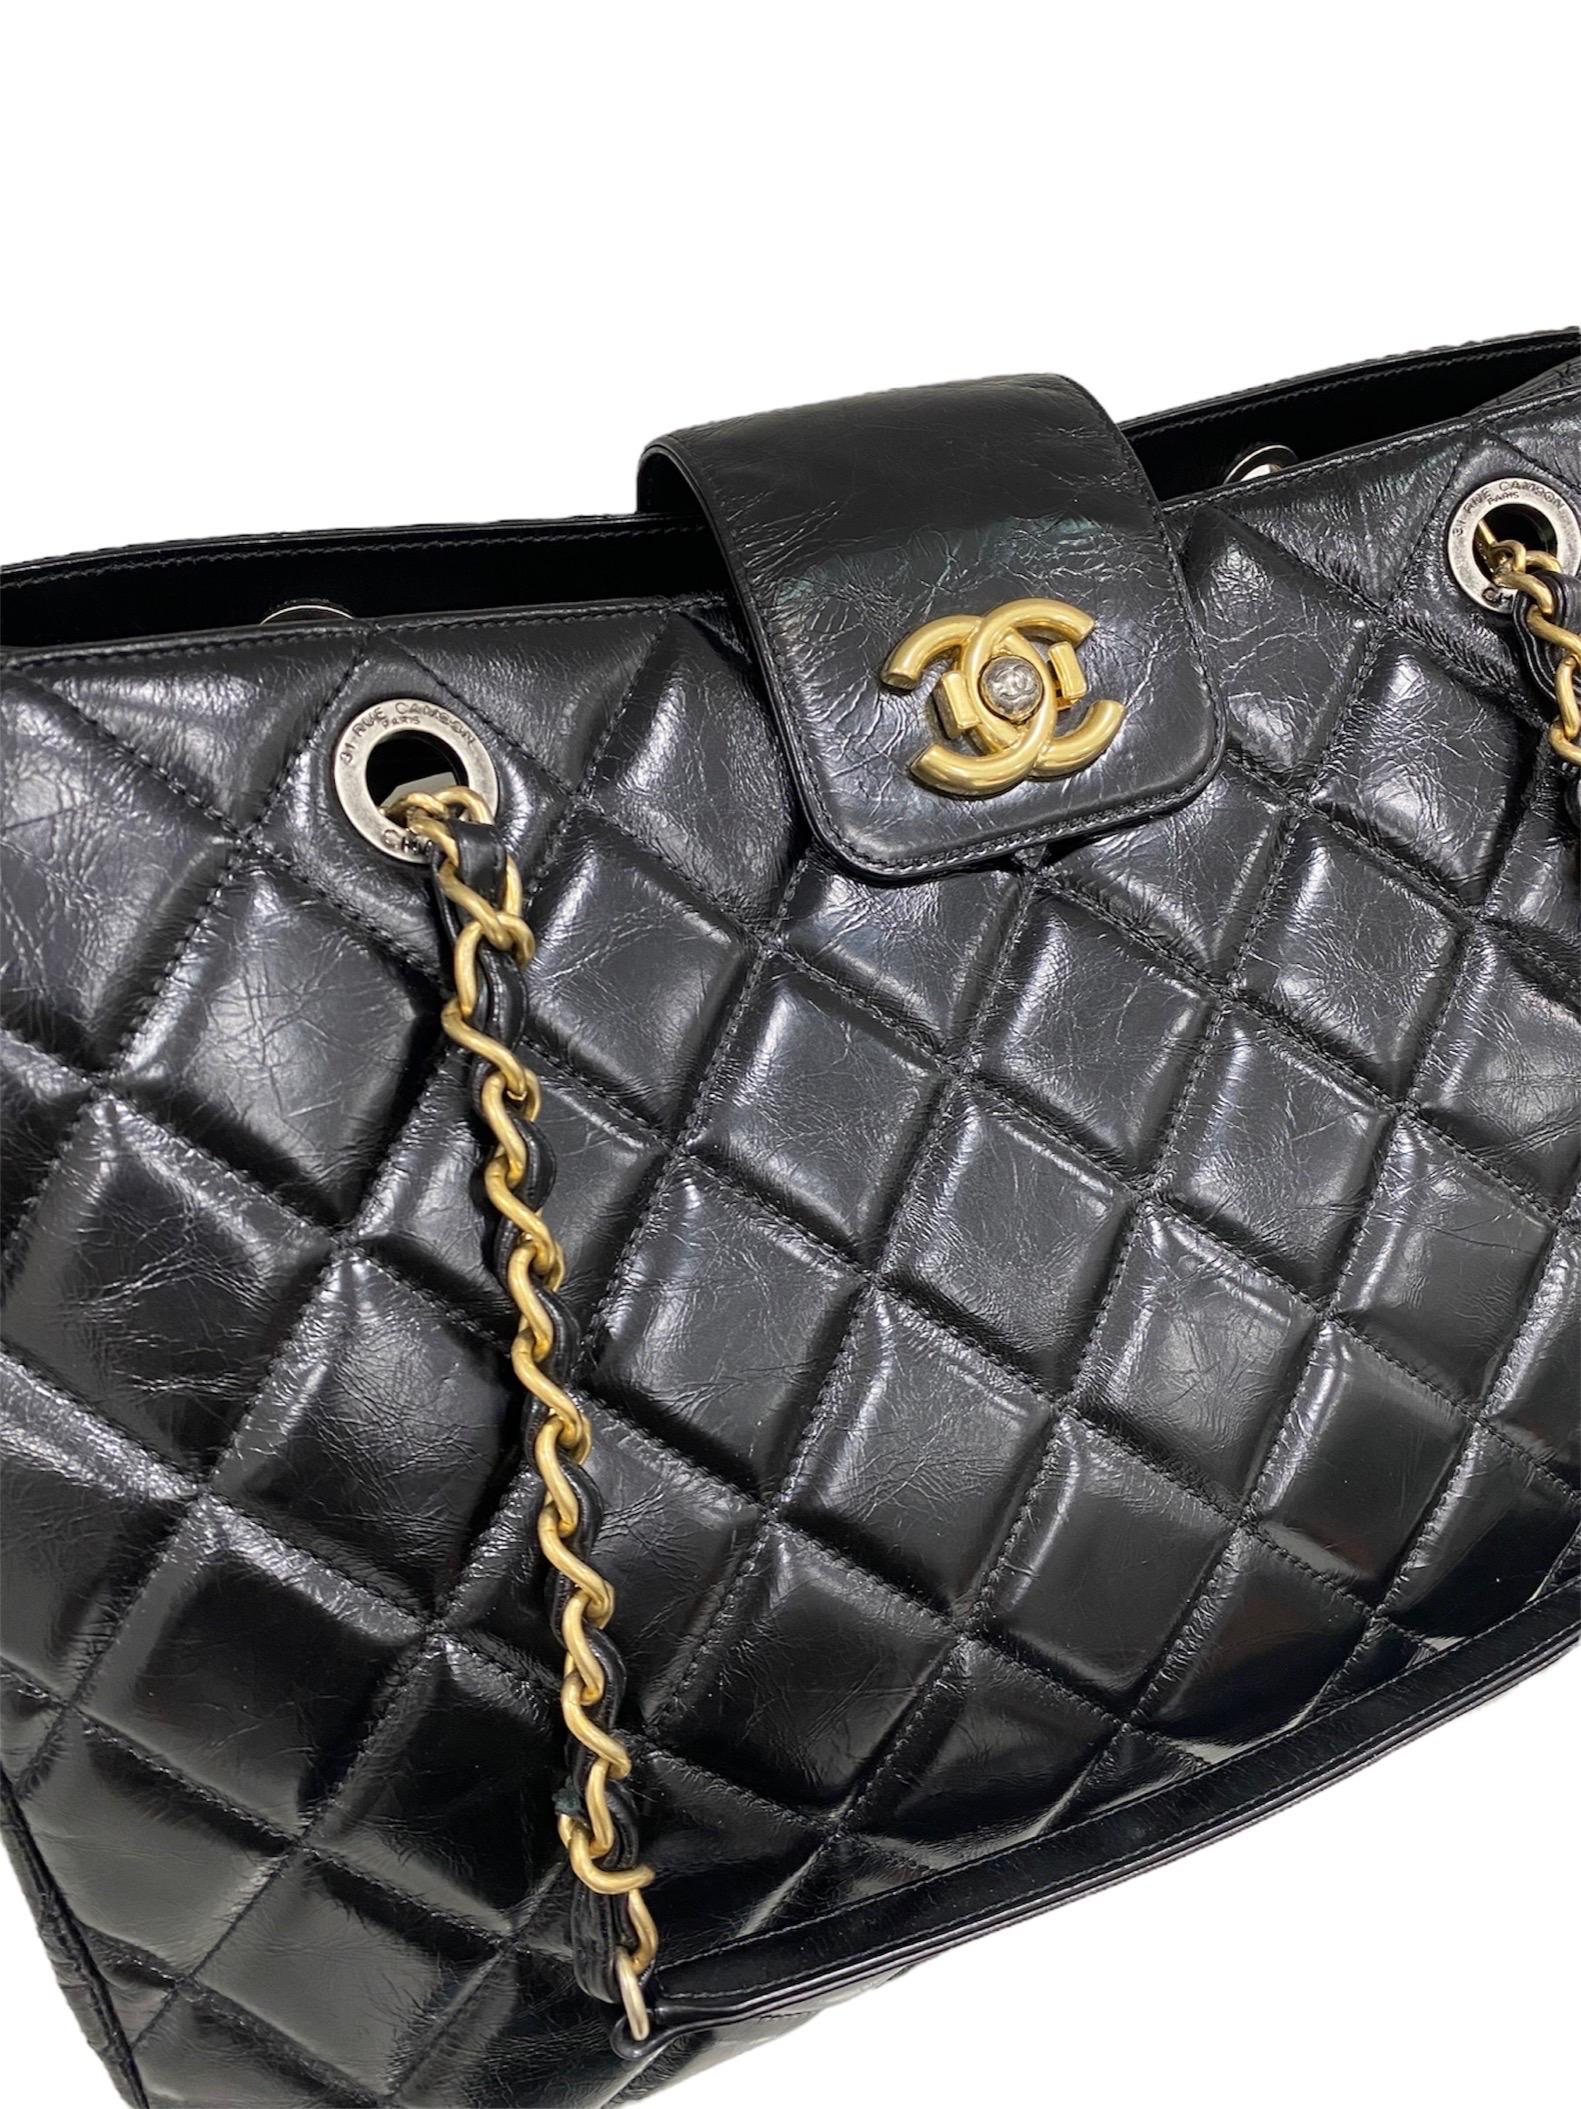 Shopper bag by Chanel, year 2015 – 2016, in shiny black quilted leather with golden hardware.
It has a closure with band and interlocking button CC. The interior is lined with a soft burgundy fabric and is divided into 2 compartments with a central